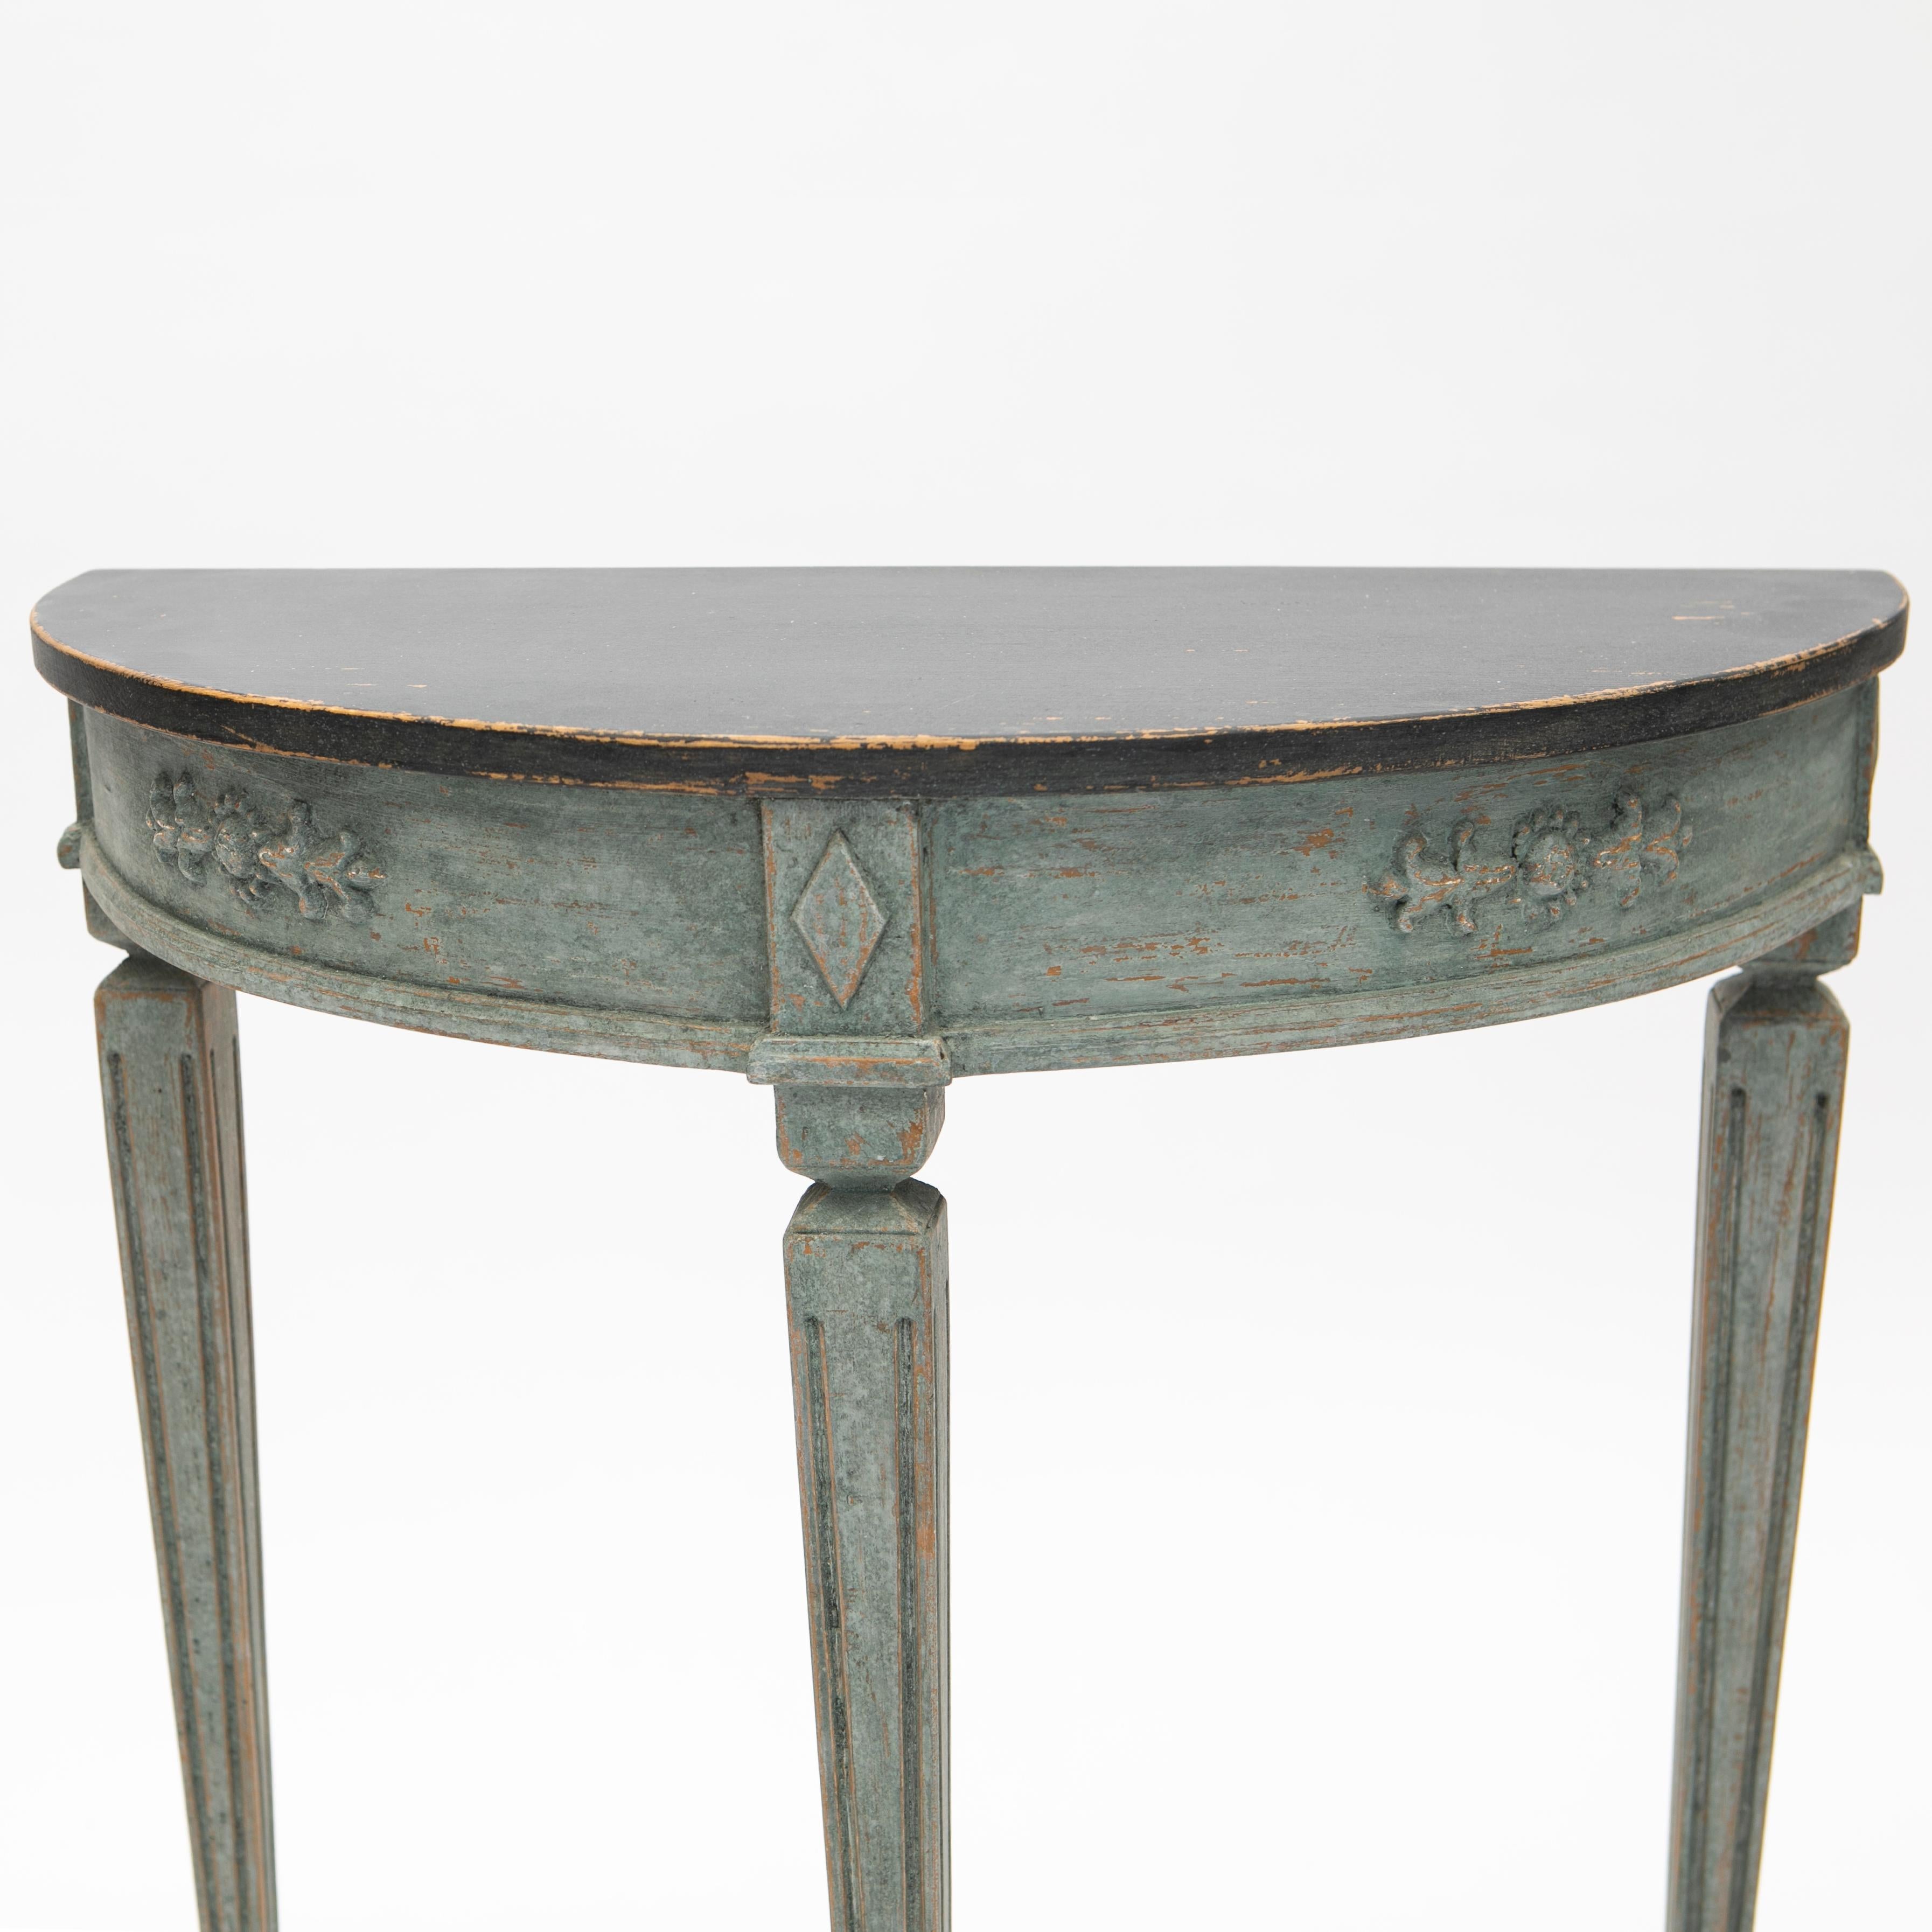 Hand-Painted Pair of Demilune Console Tables, Gustavian Style